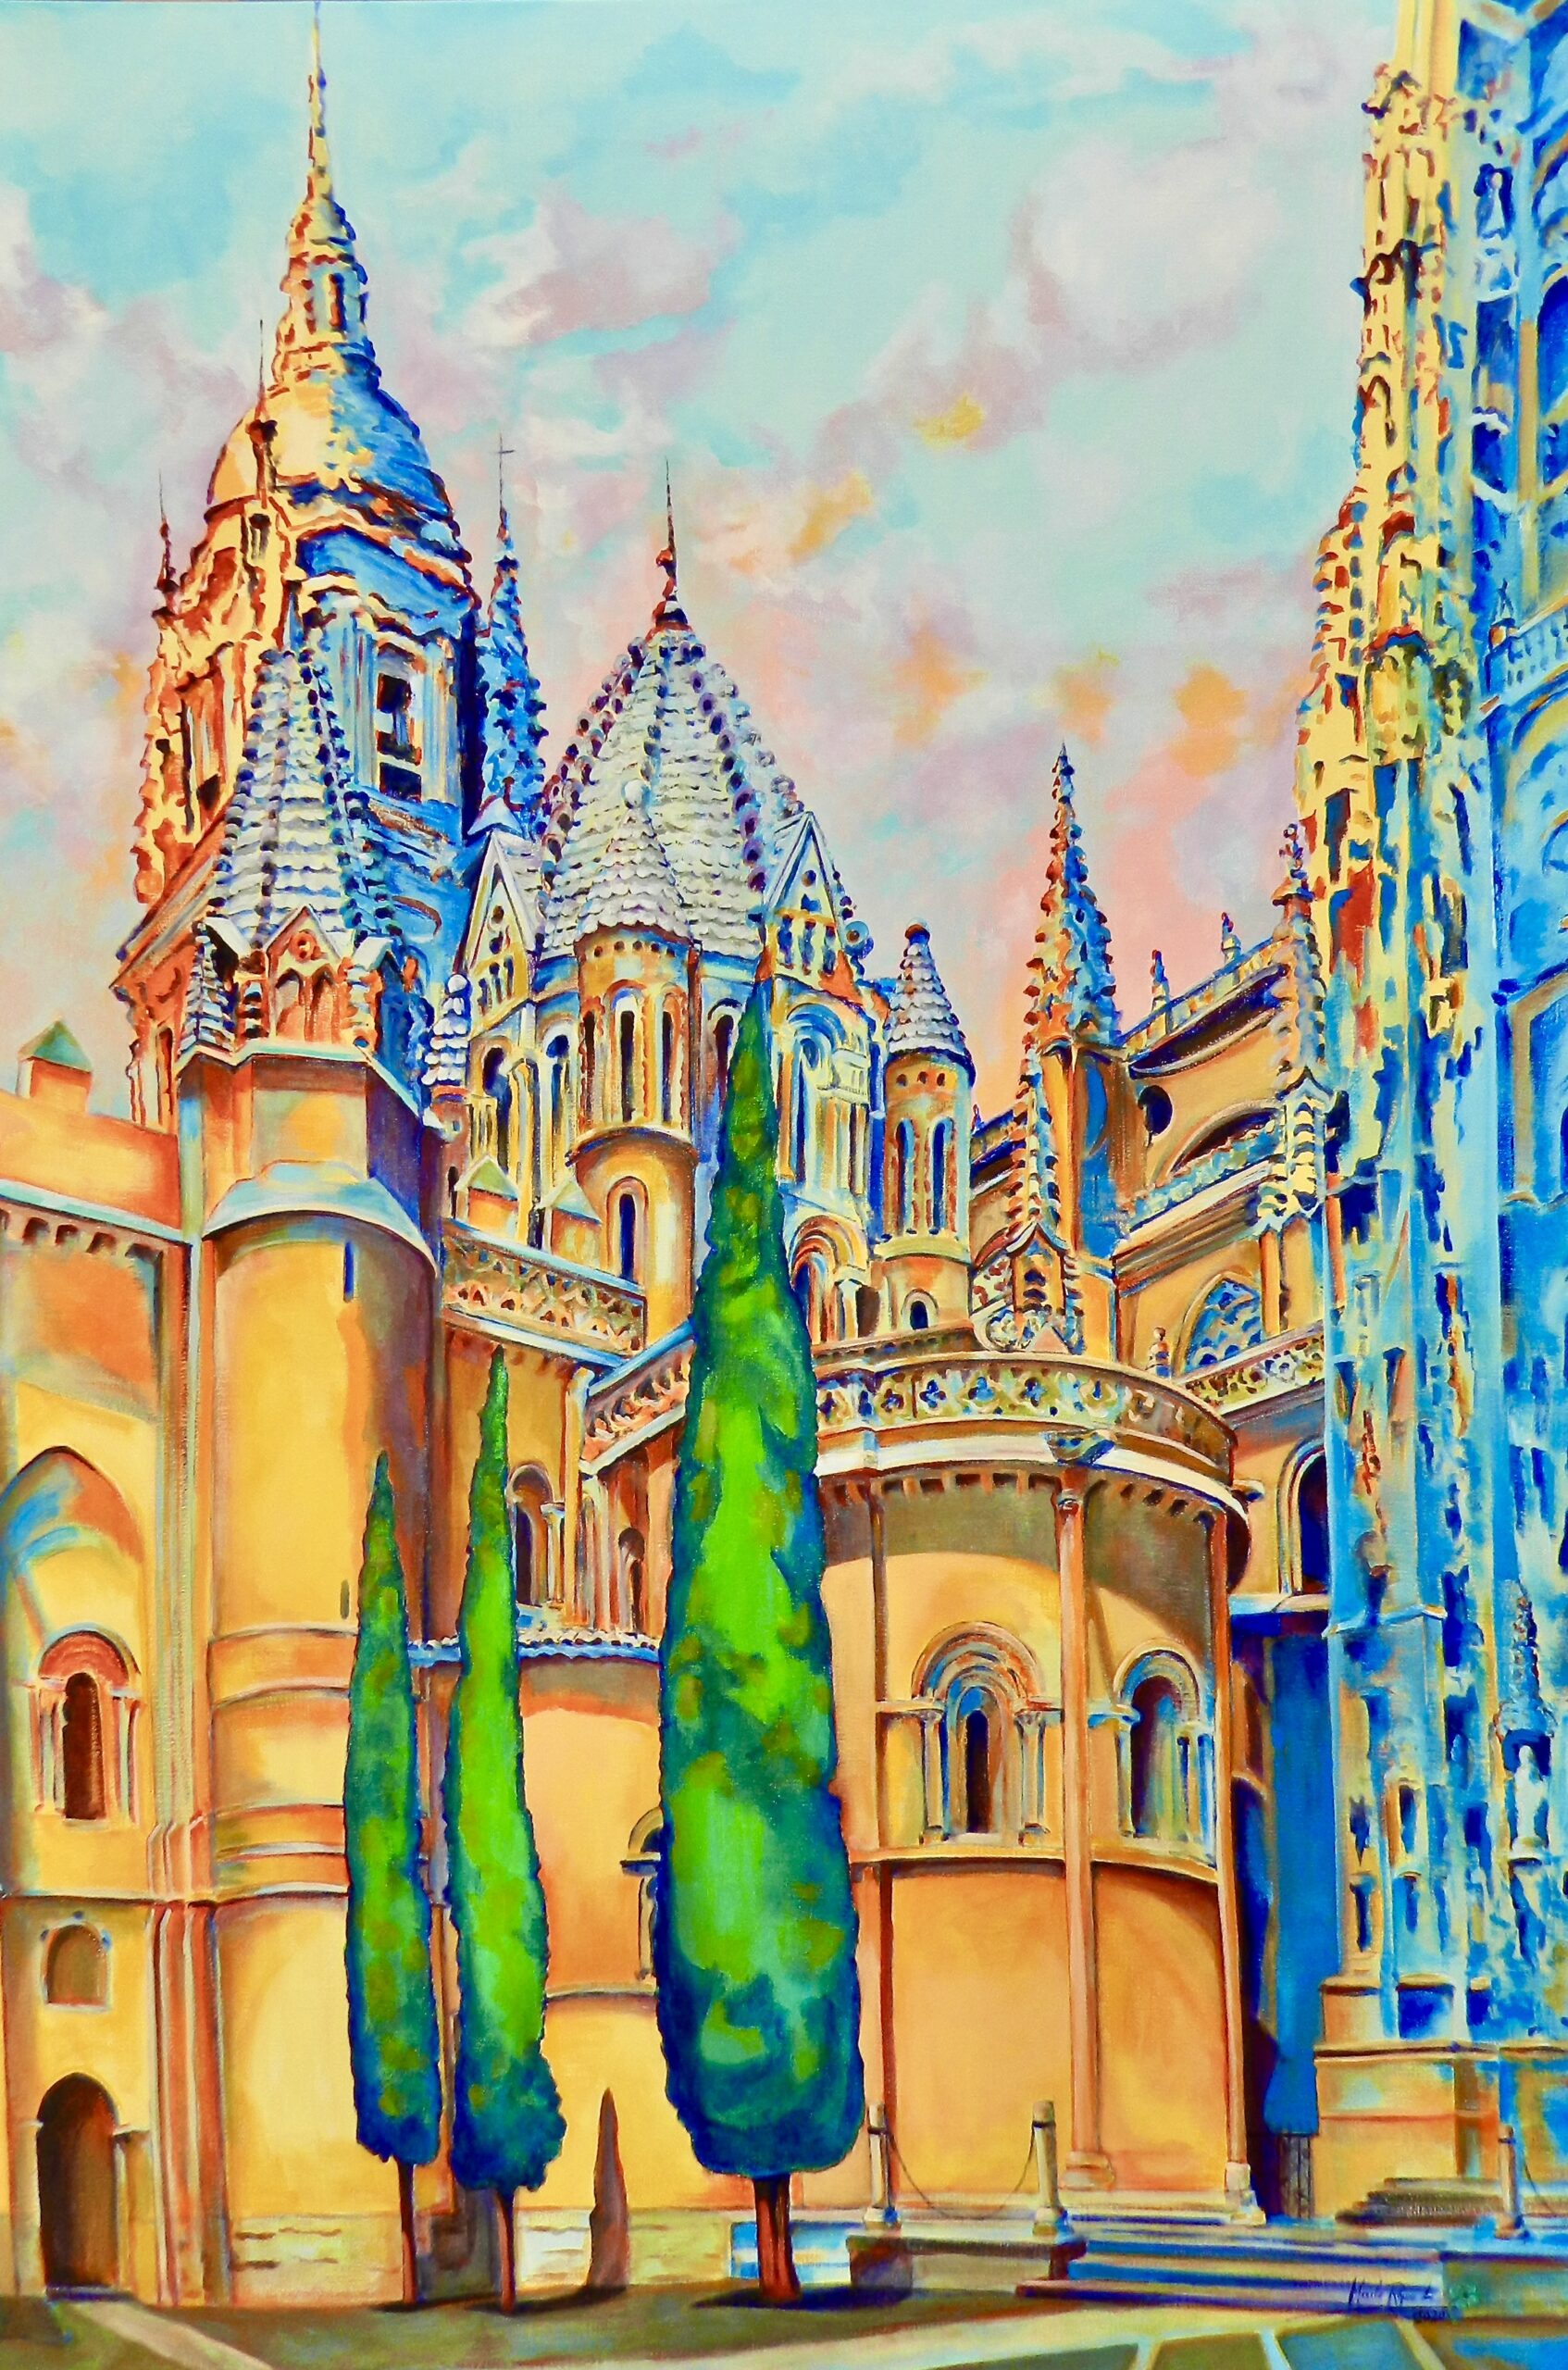 Patio Chico, Painting by Maite Rodriguez